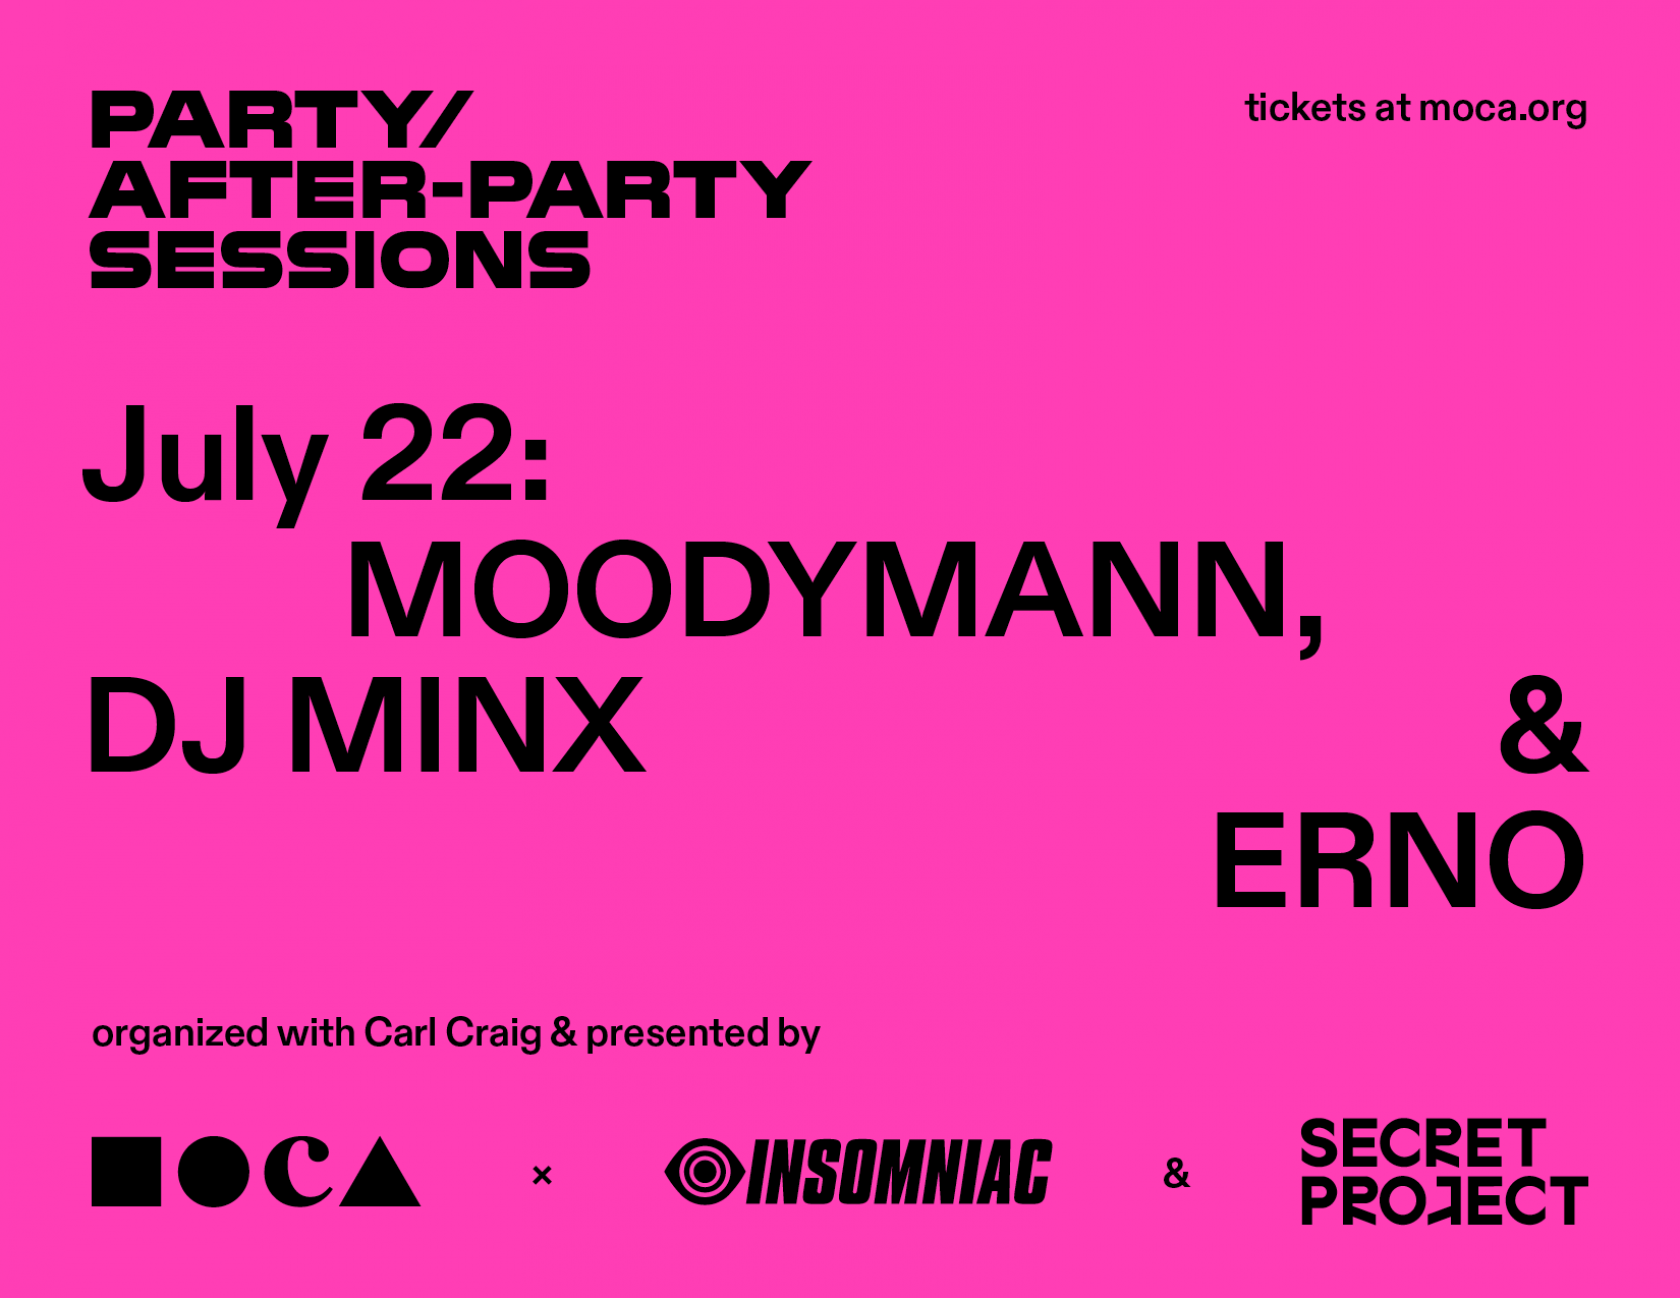 Party/After-Party Sessions With Moodymann, DJ Minx, and Erno